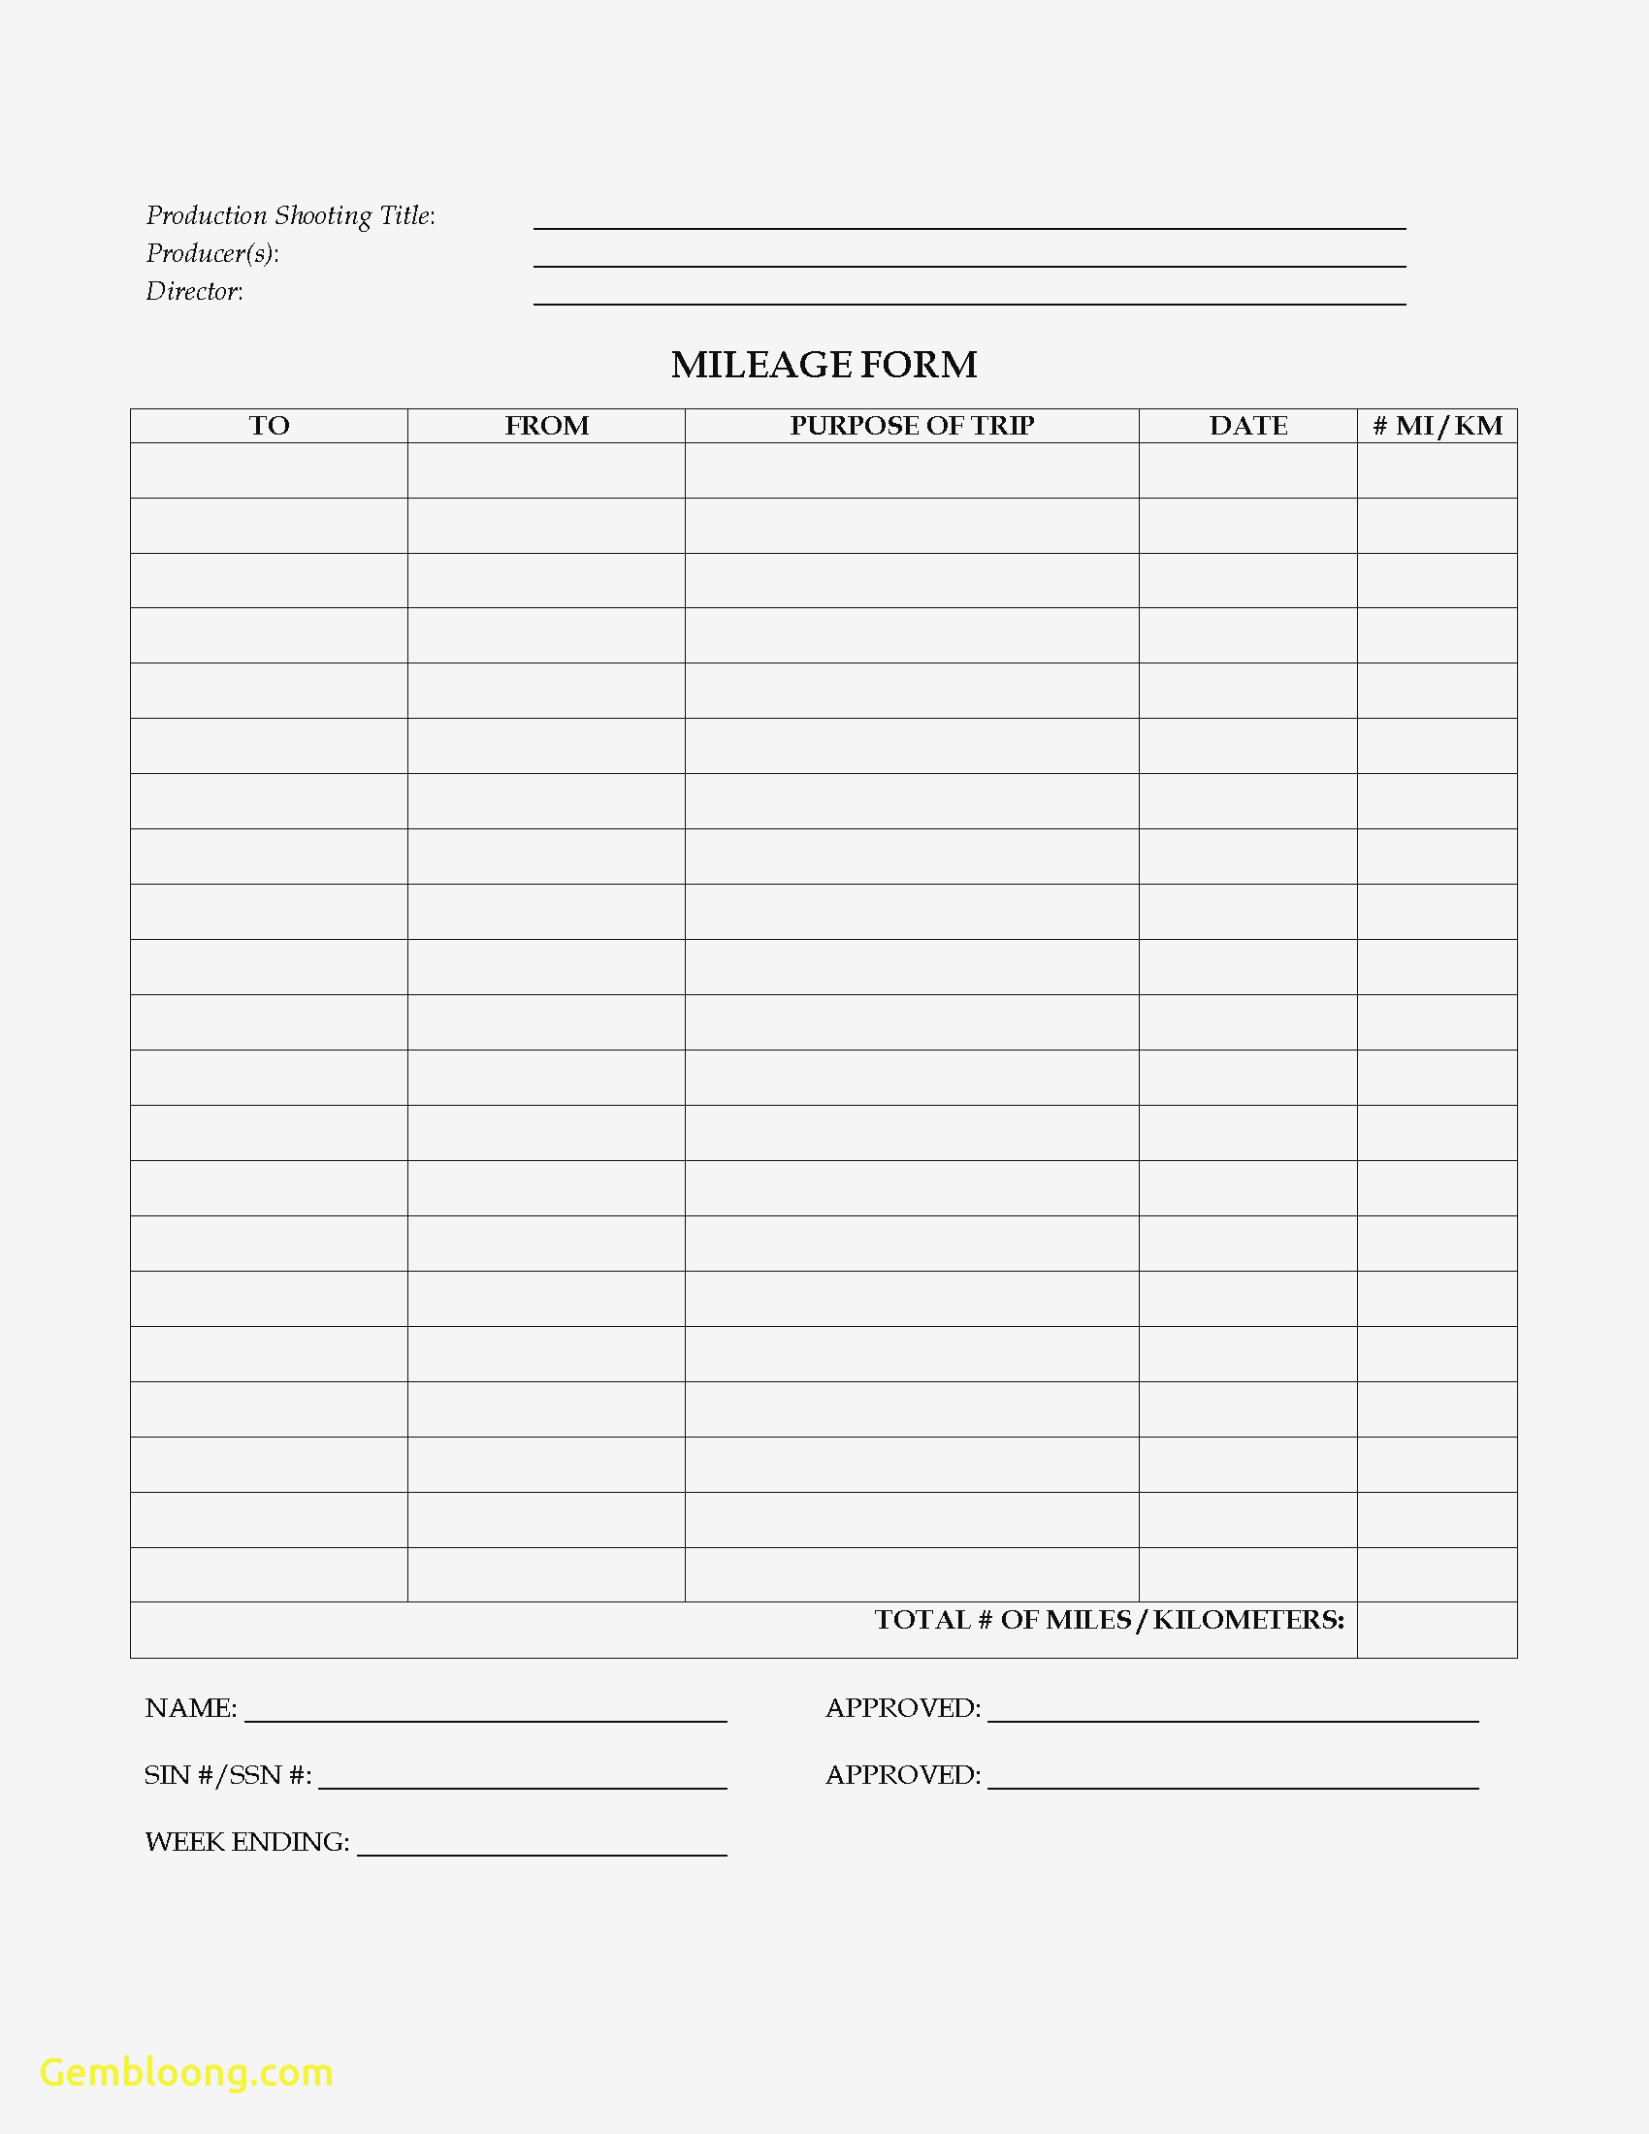 Uber Mileage Spreadsheet With Mileage Spreadsheet For Taxes Lovely Uber Mileage Tracker .. – Form